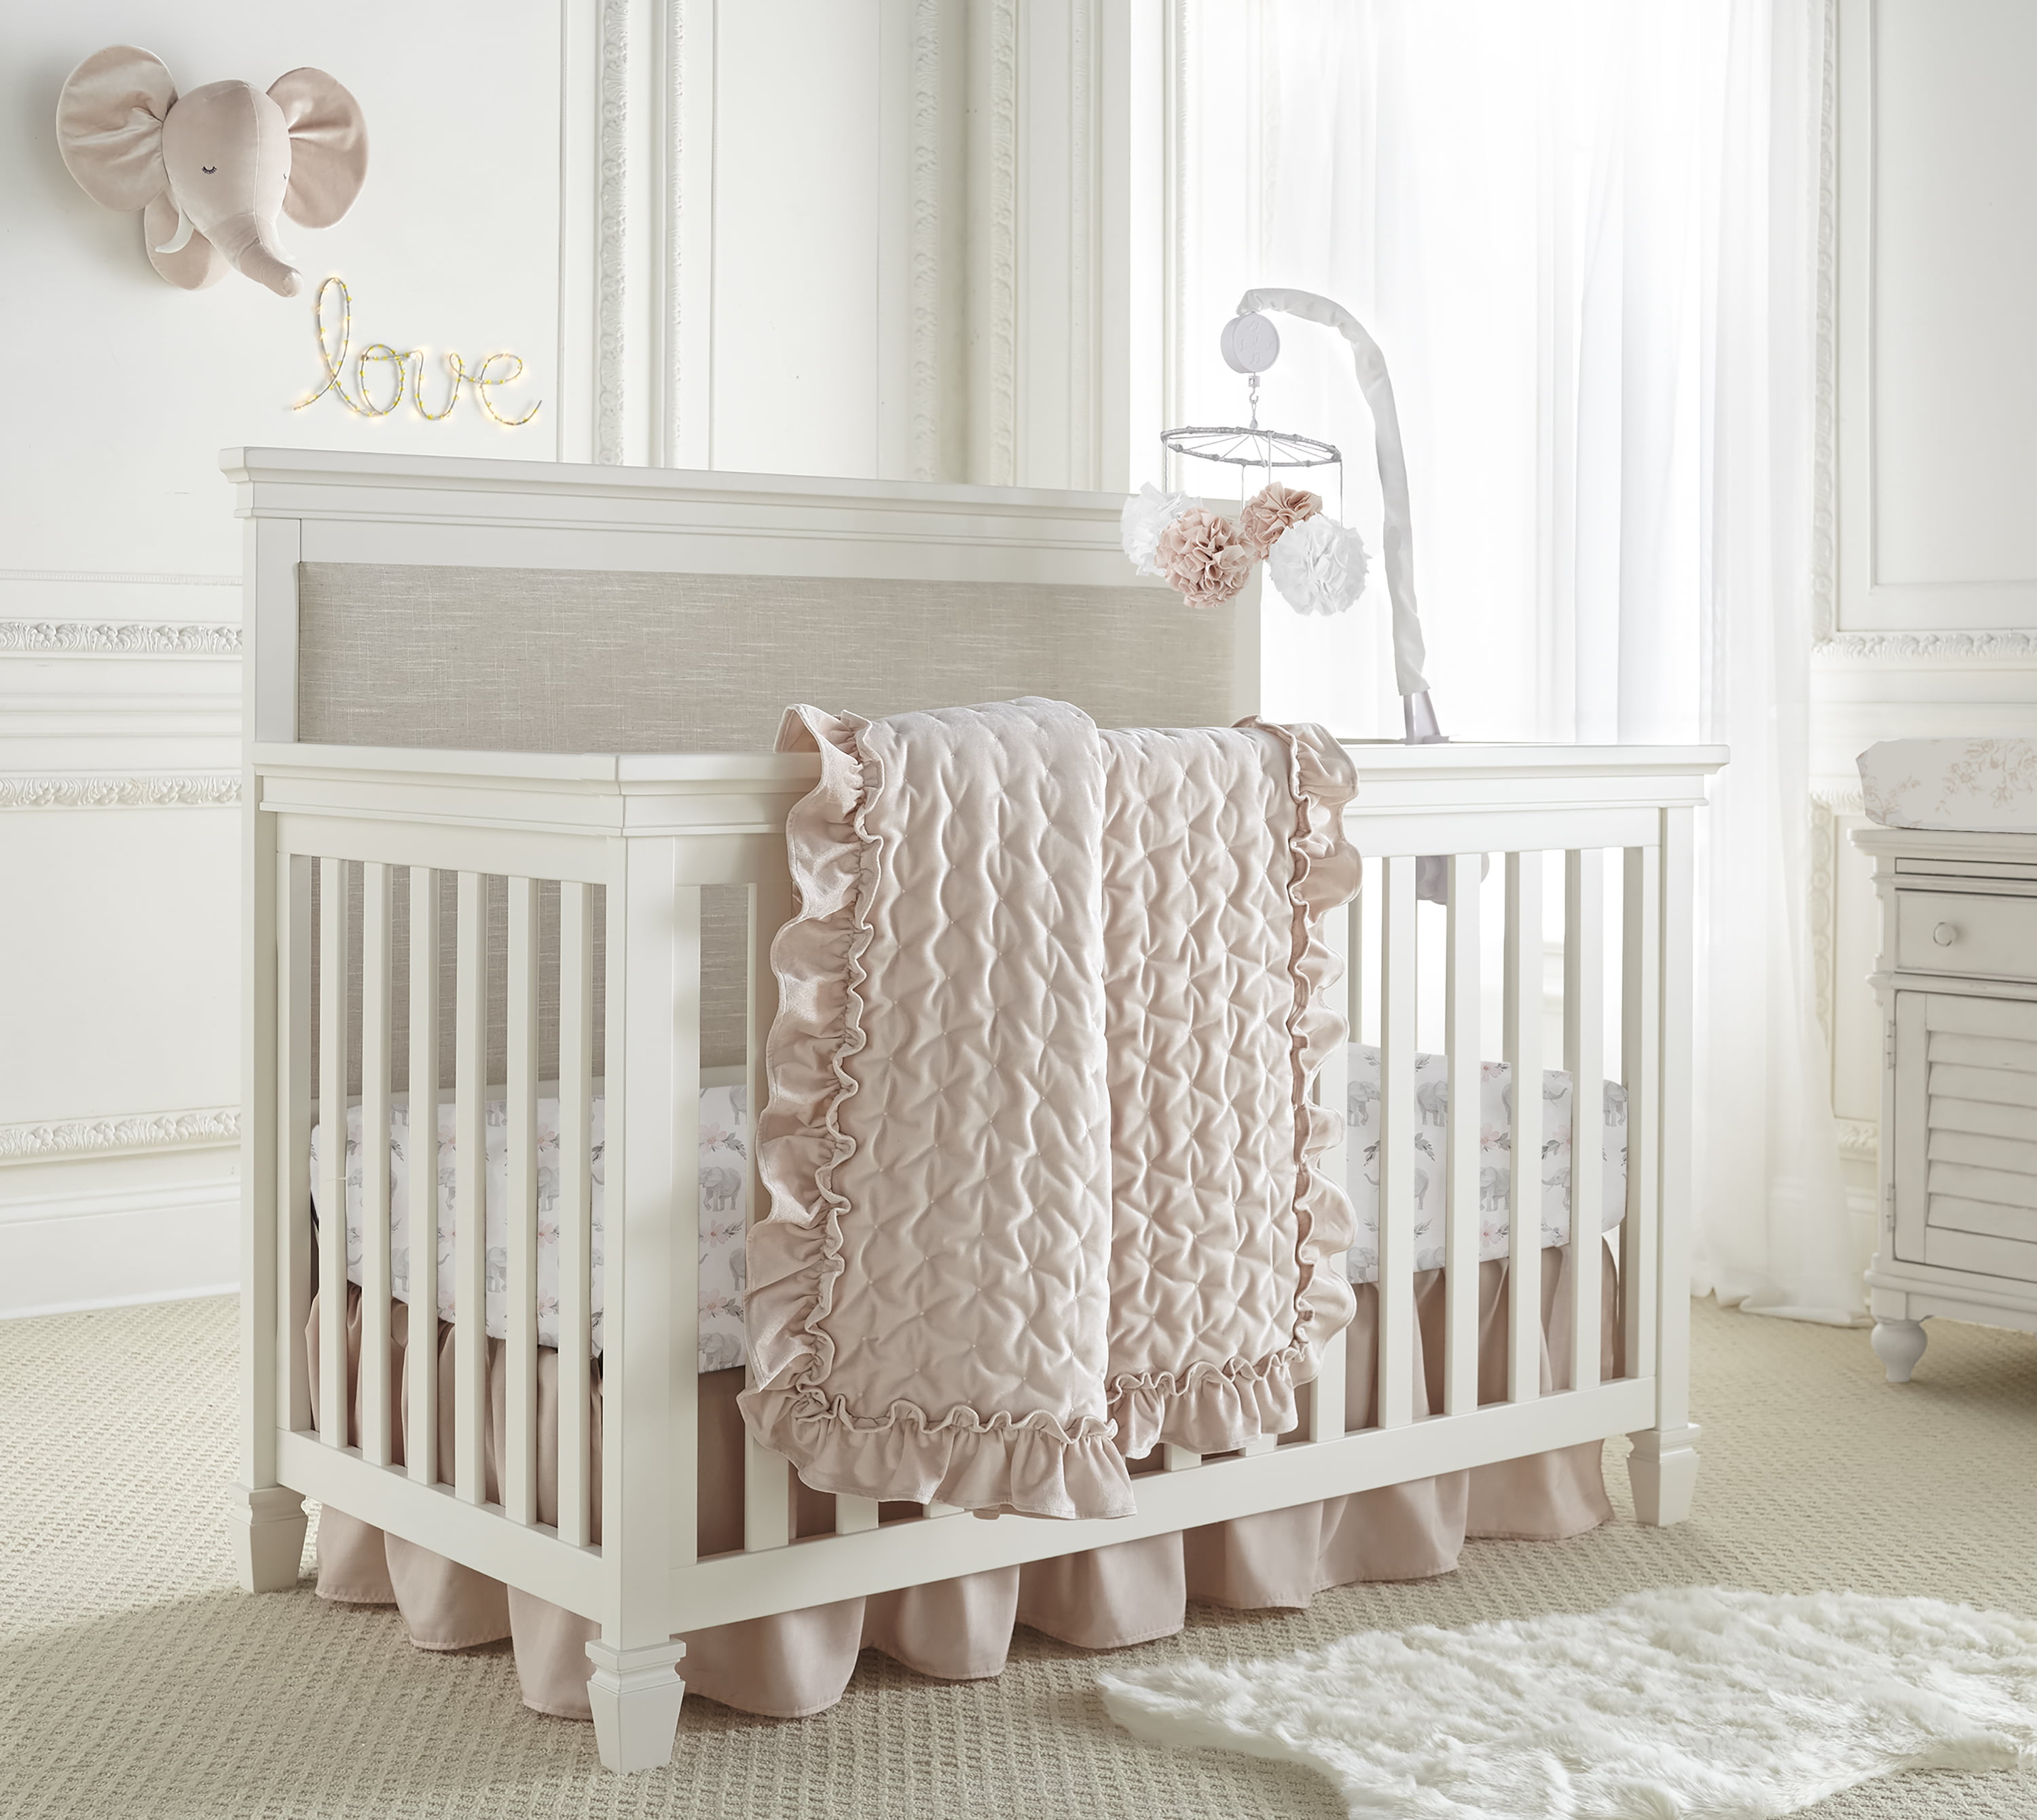 Baby Shop: Baby Products, Furniture, & Bedding